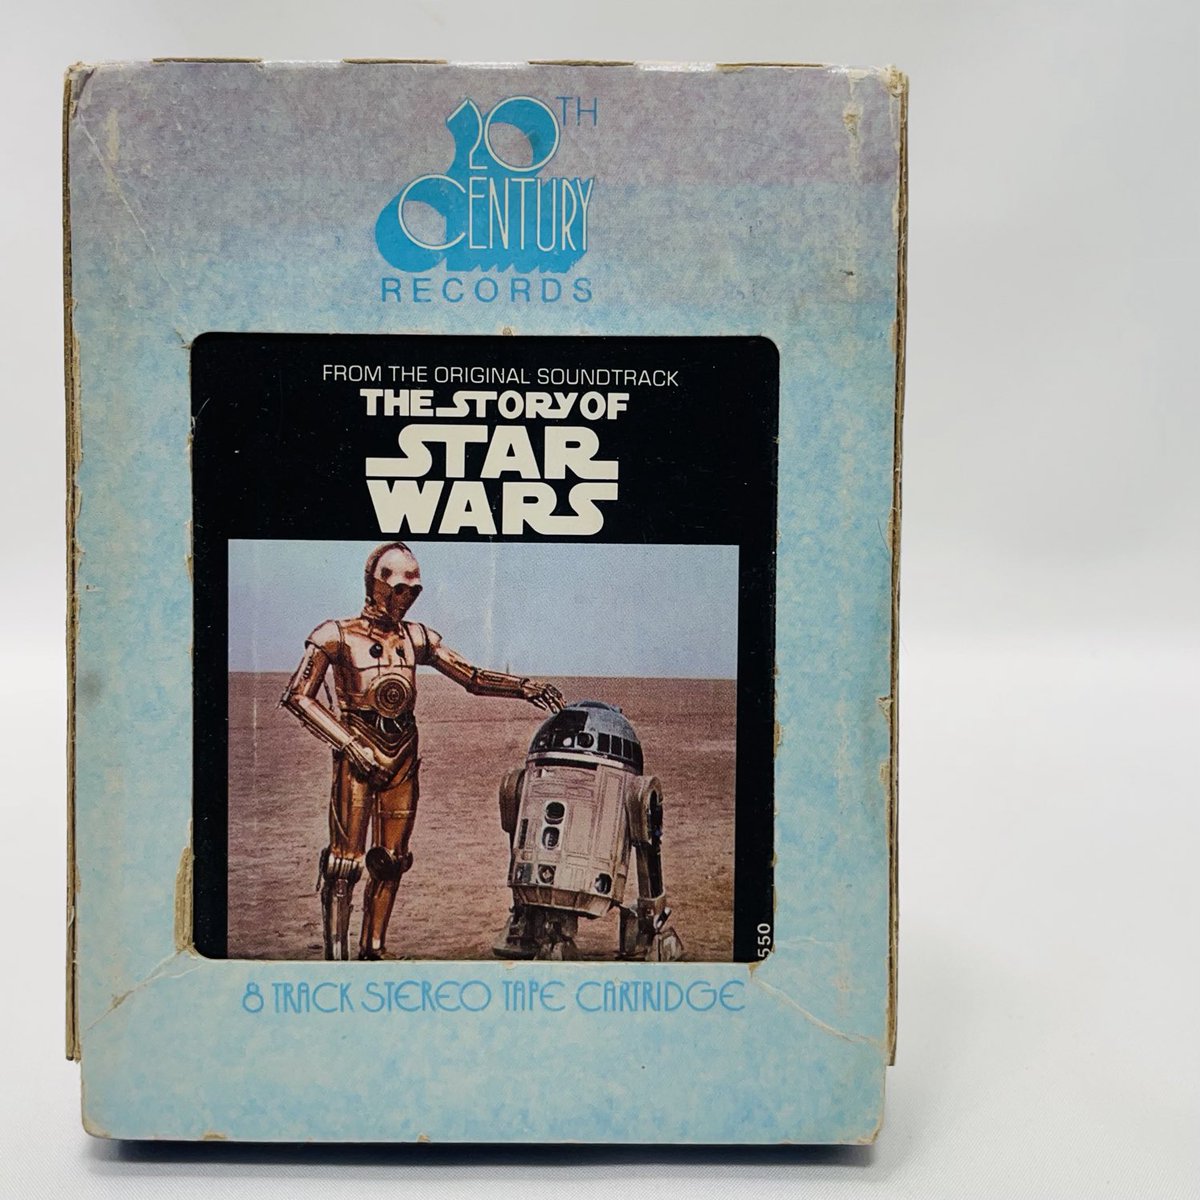 For families who may have purchased a new car in 1977-1978 and went on a Memorial Day roadtrip, today’s #StarWars collectable may have been their first @StarWars soundtrack. Did you have this amazing John Williams score — and “audiobook” featuring ⁦@MarkHamill⁩ on vocals?